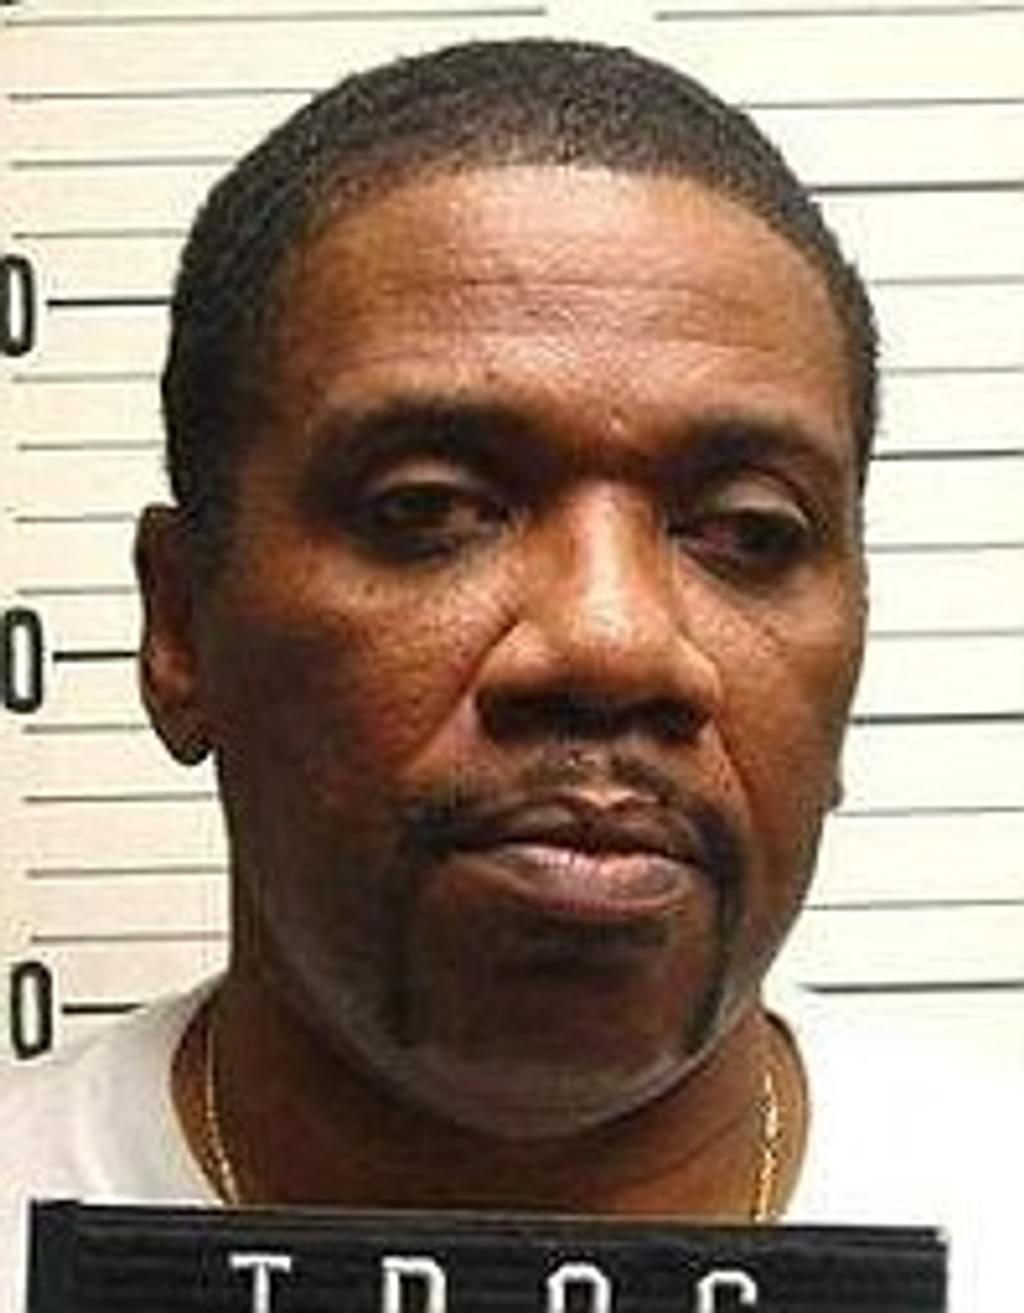 Lawyers Seek Clemency for Tennessee Death-Row Prisoner Dying of End-Stage Cancer